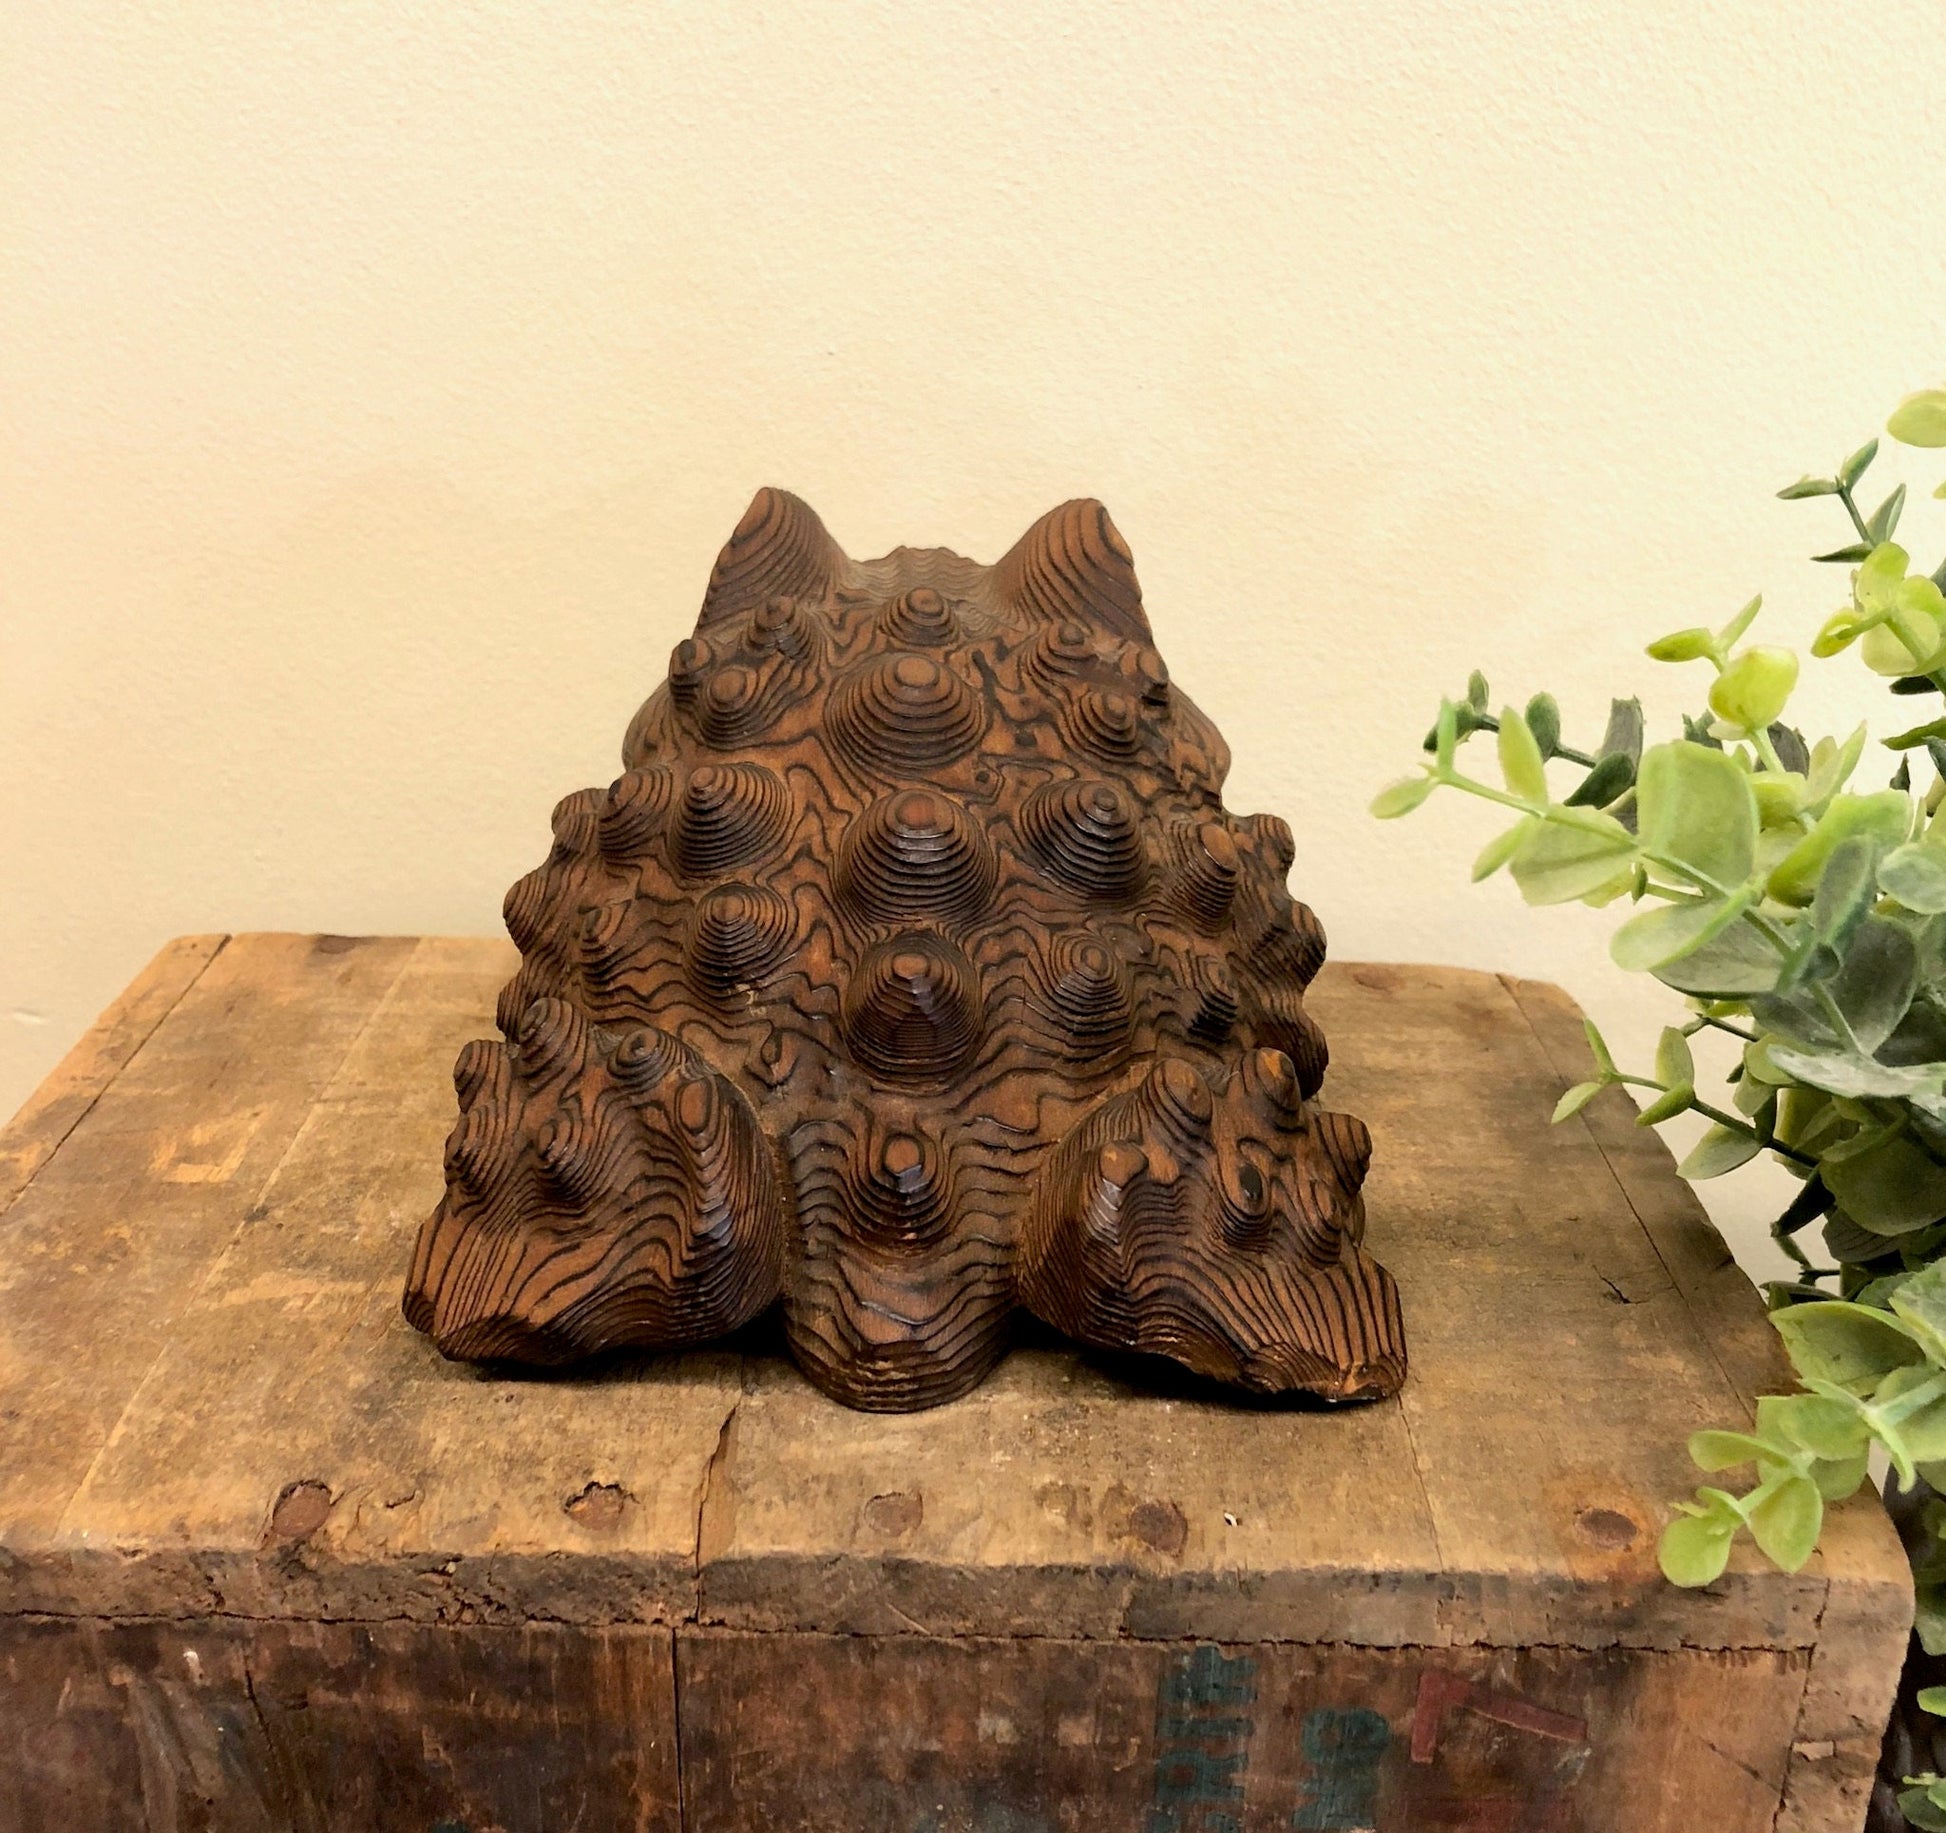 Vintage hand carved wooden frog sculpture with intricate textured design, displayed on rustic wooden surface alongside green plant, for unique animal-themed home decor accent.